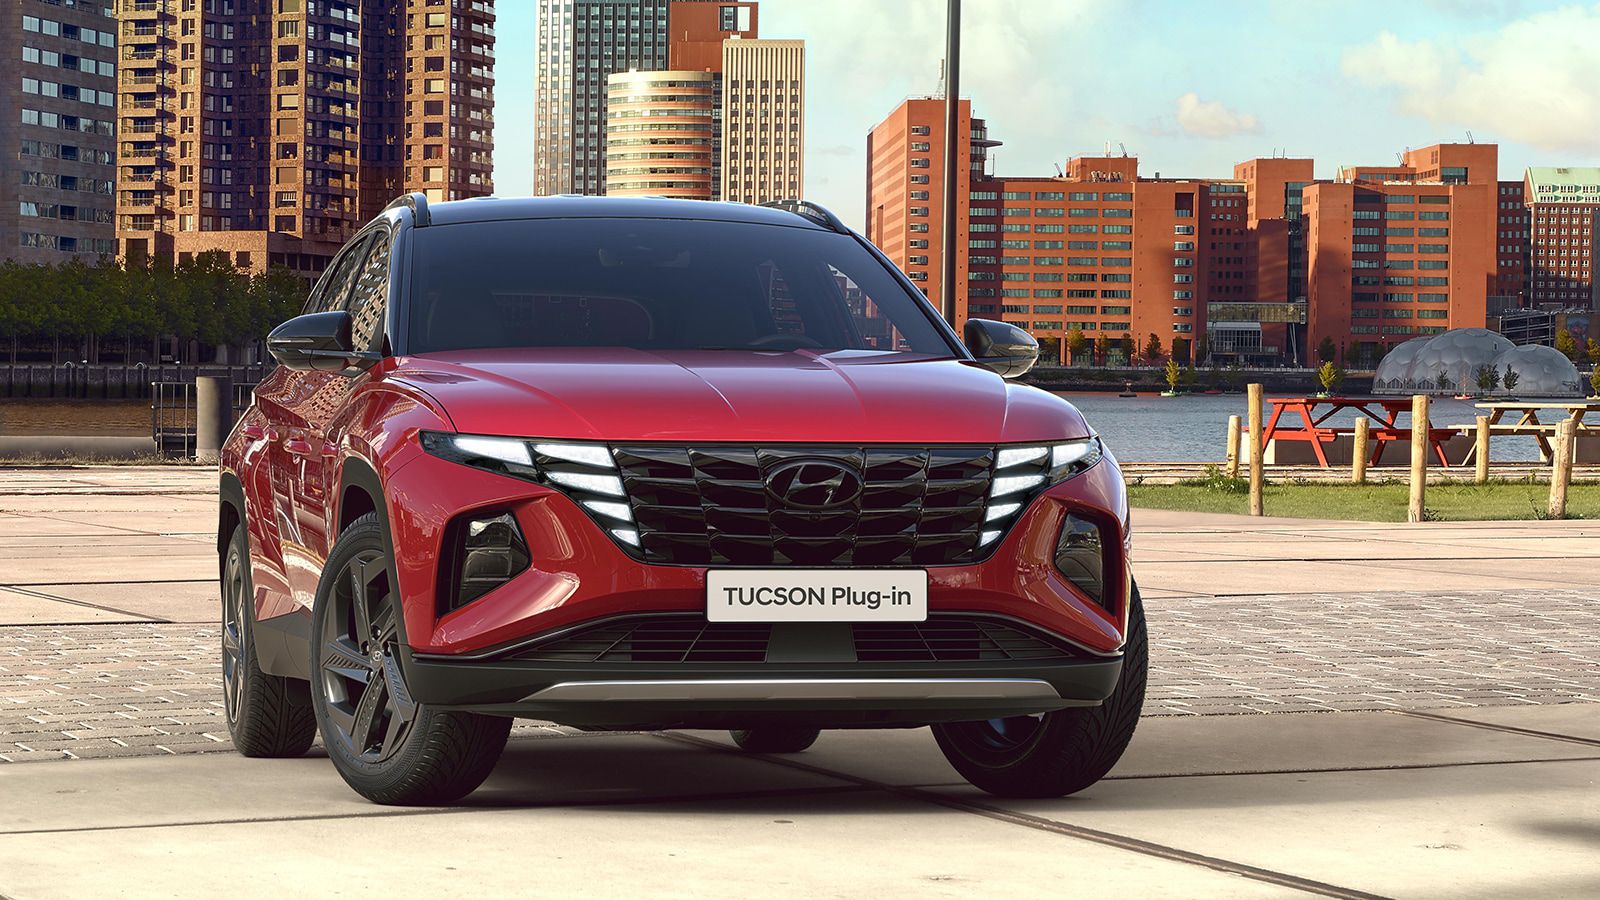 Hyundai TUCSON Plug-in Hybrid in Engine Red pictured from the front